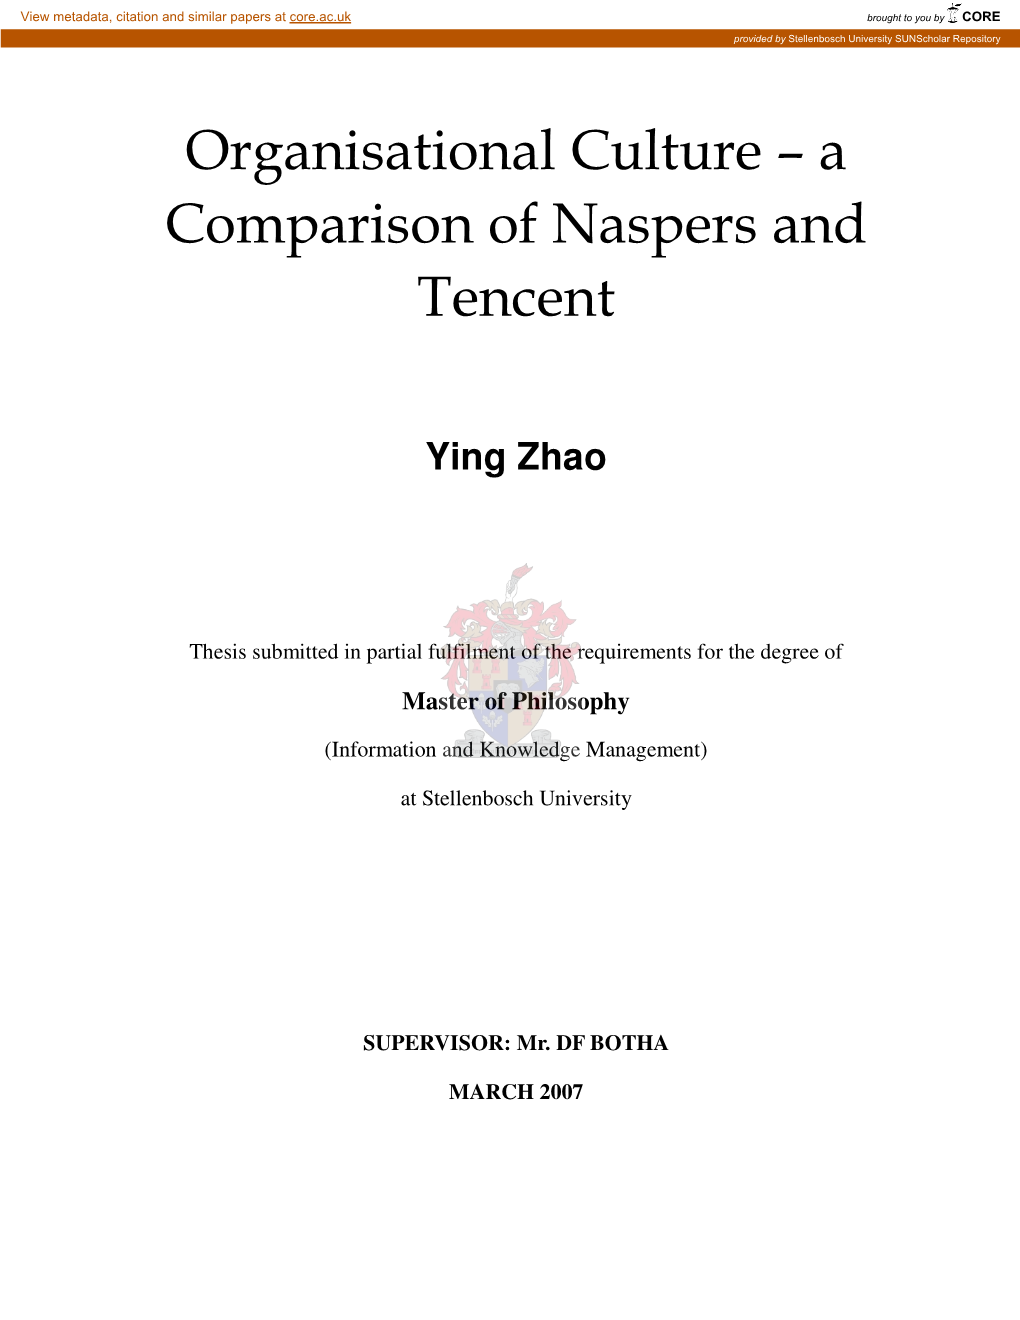 Organisational Culture – a Comparison of Naspers and Tencent